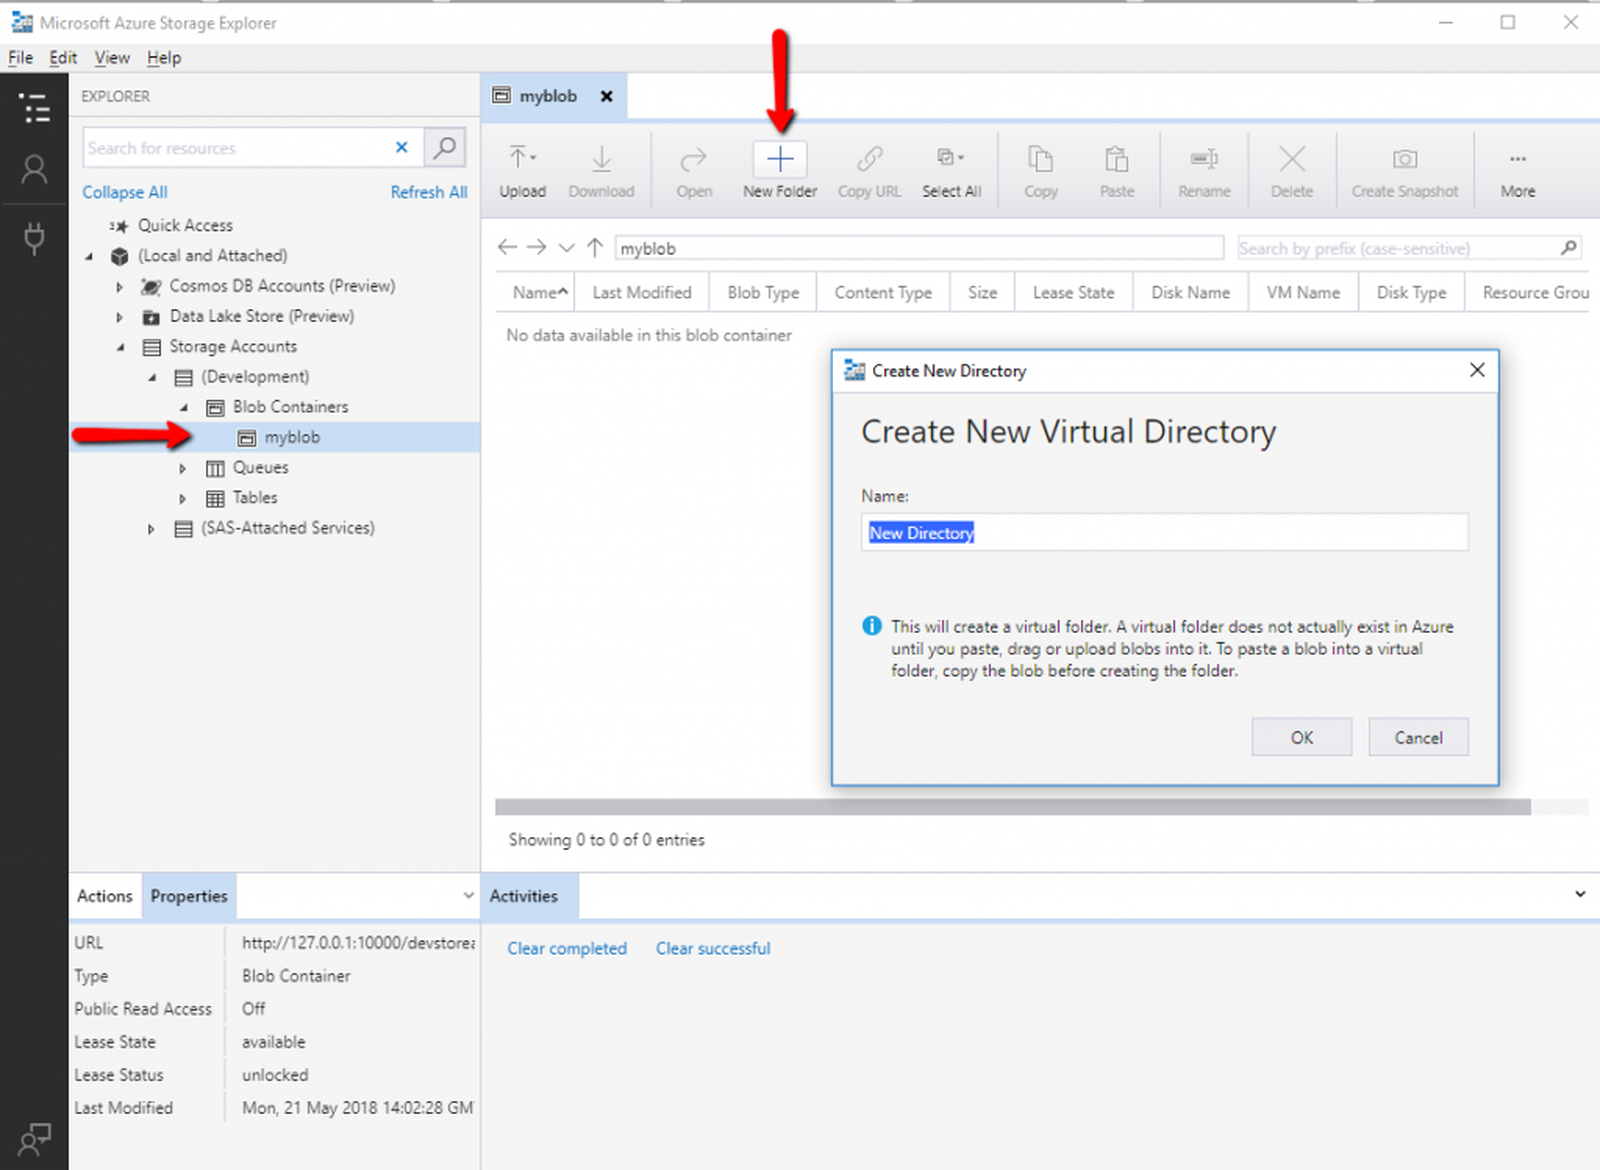 Creating the new Virtual Directory under Blob Container